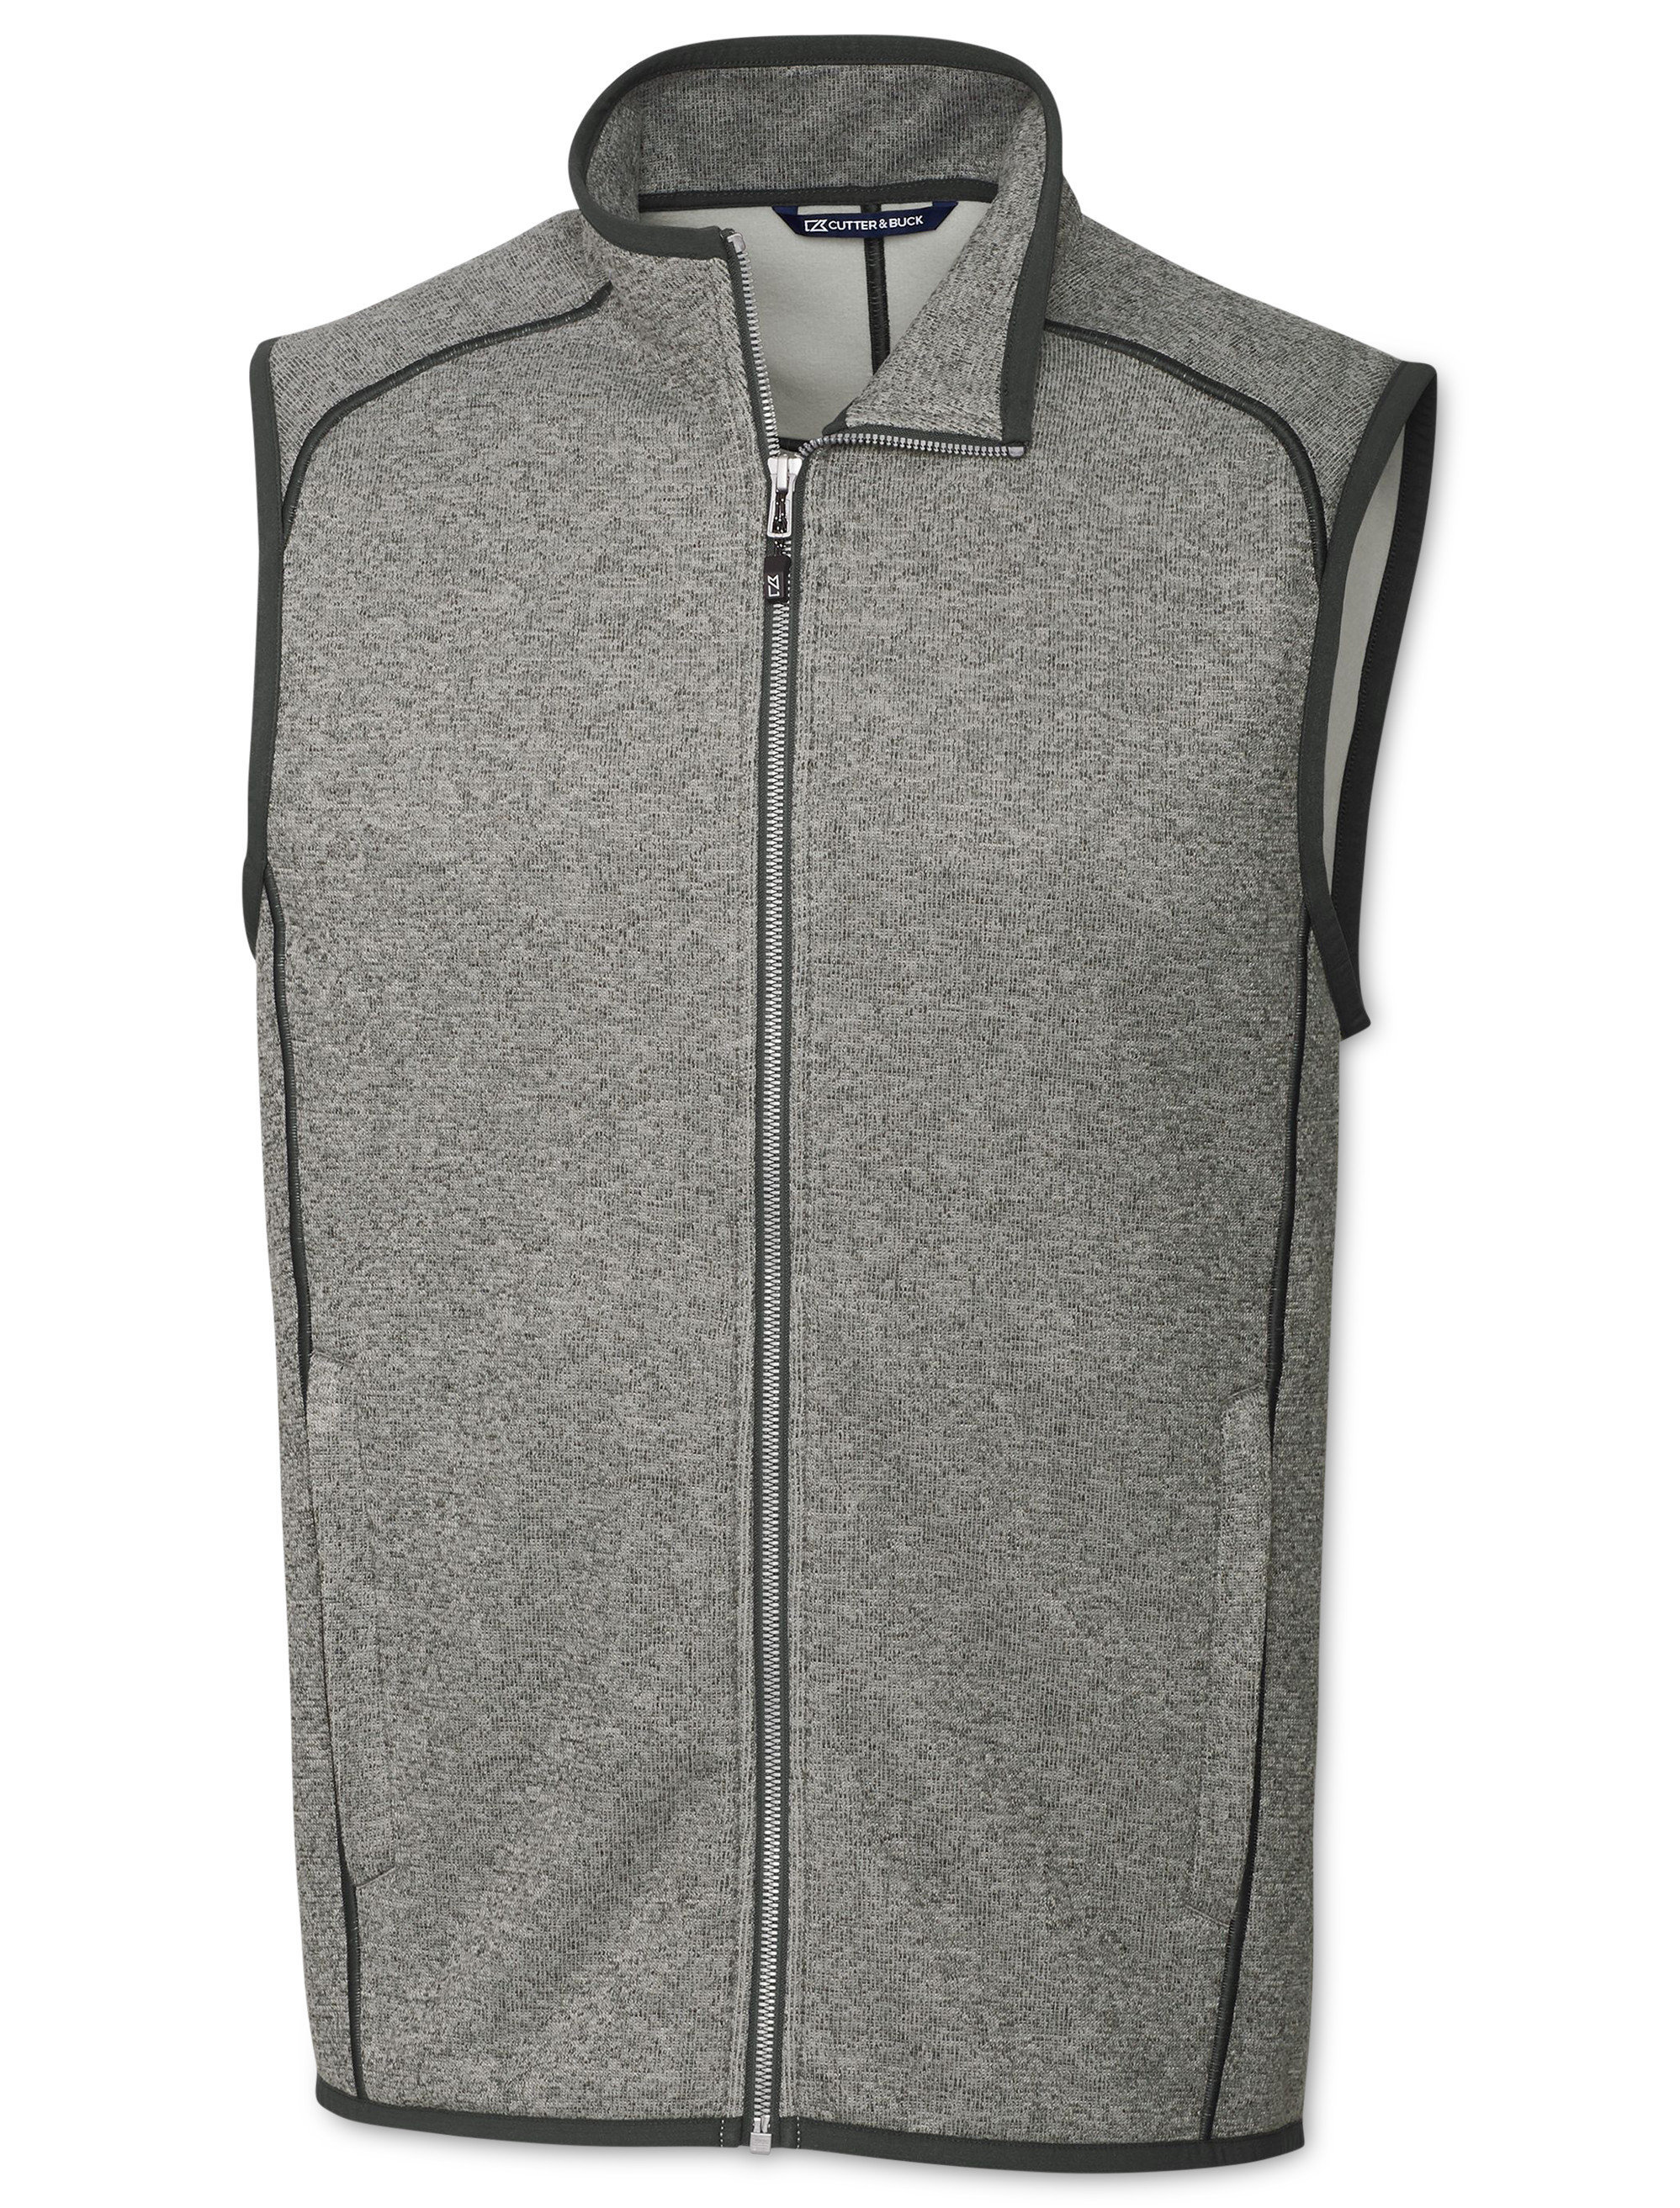 Snazzy Kwade trouw antenne Big + Tall Vests | DXL